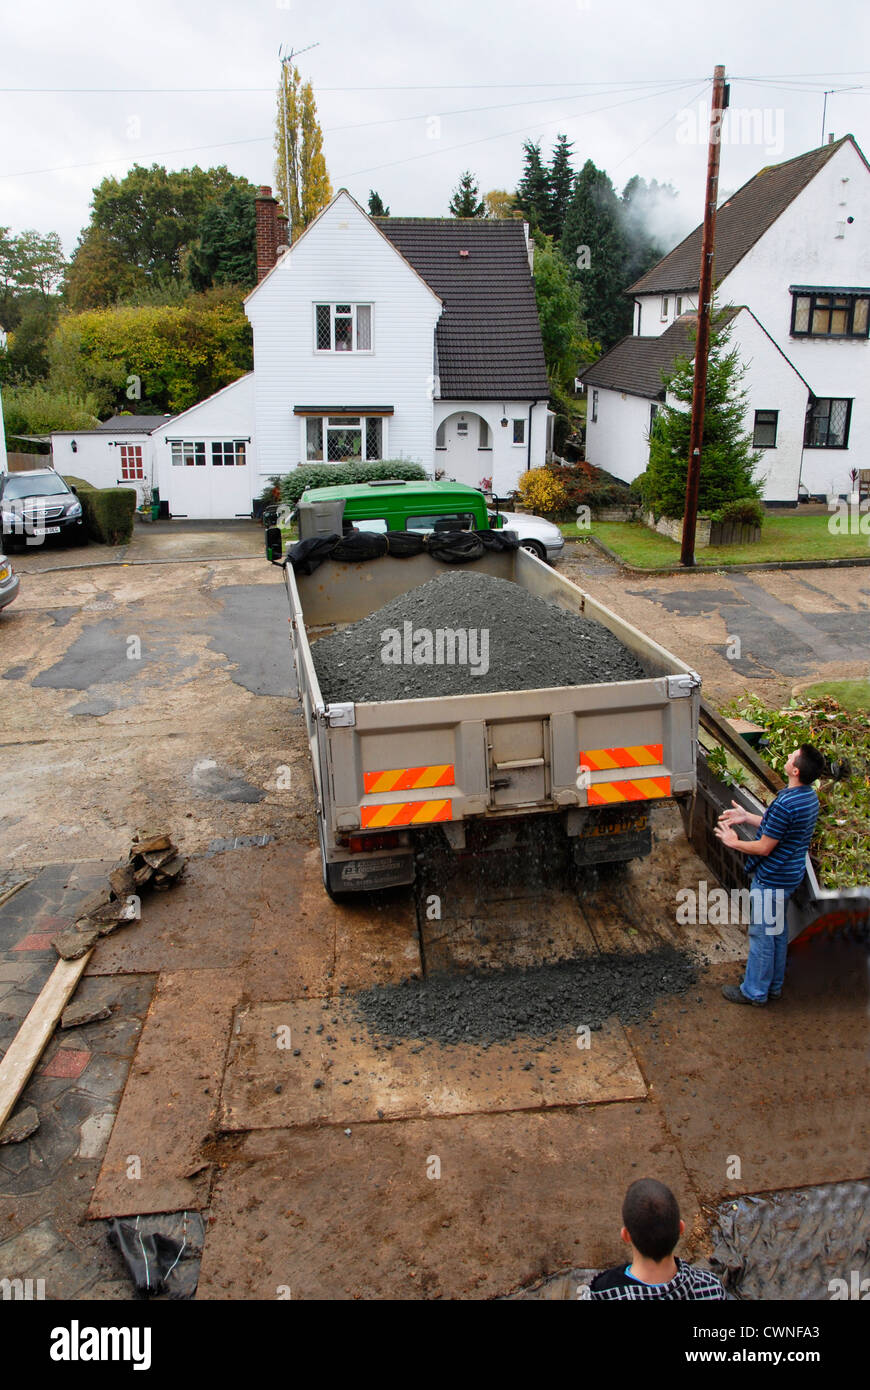 Tipper lorry unloading aggregate Stock Photo